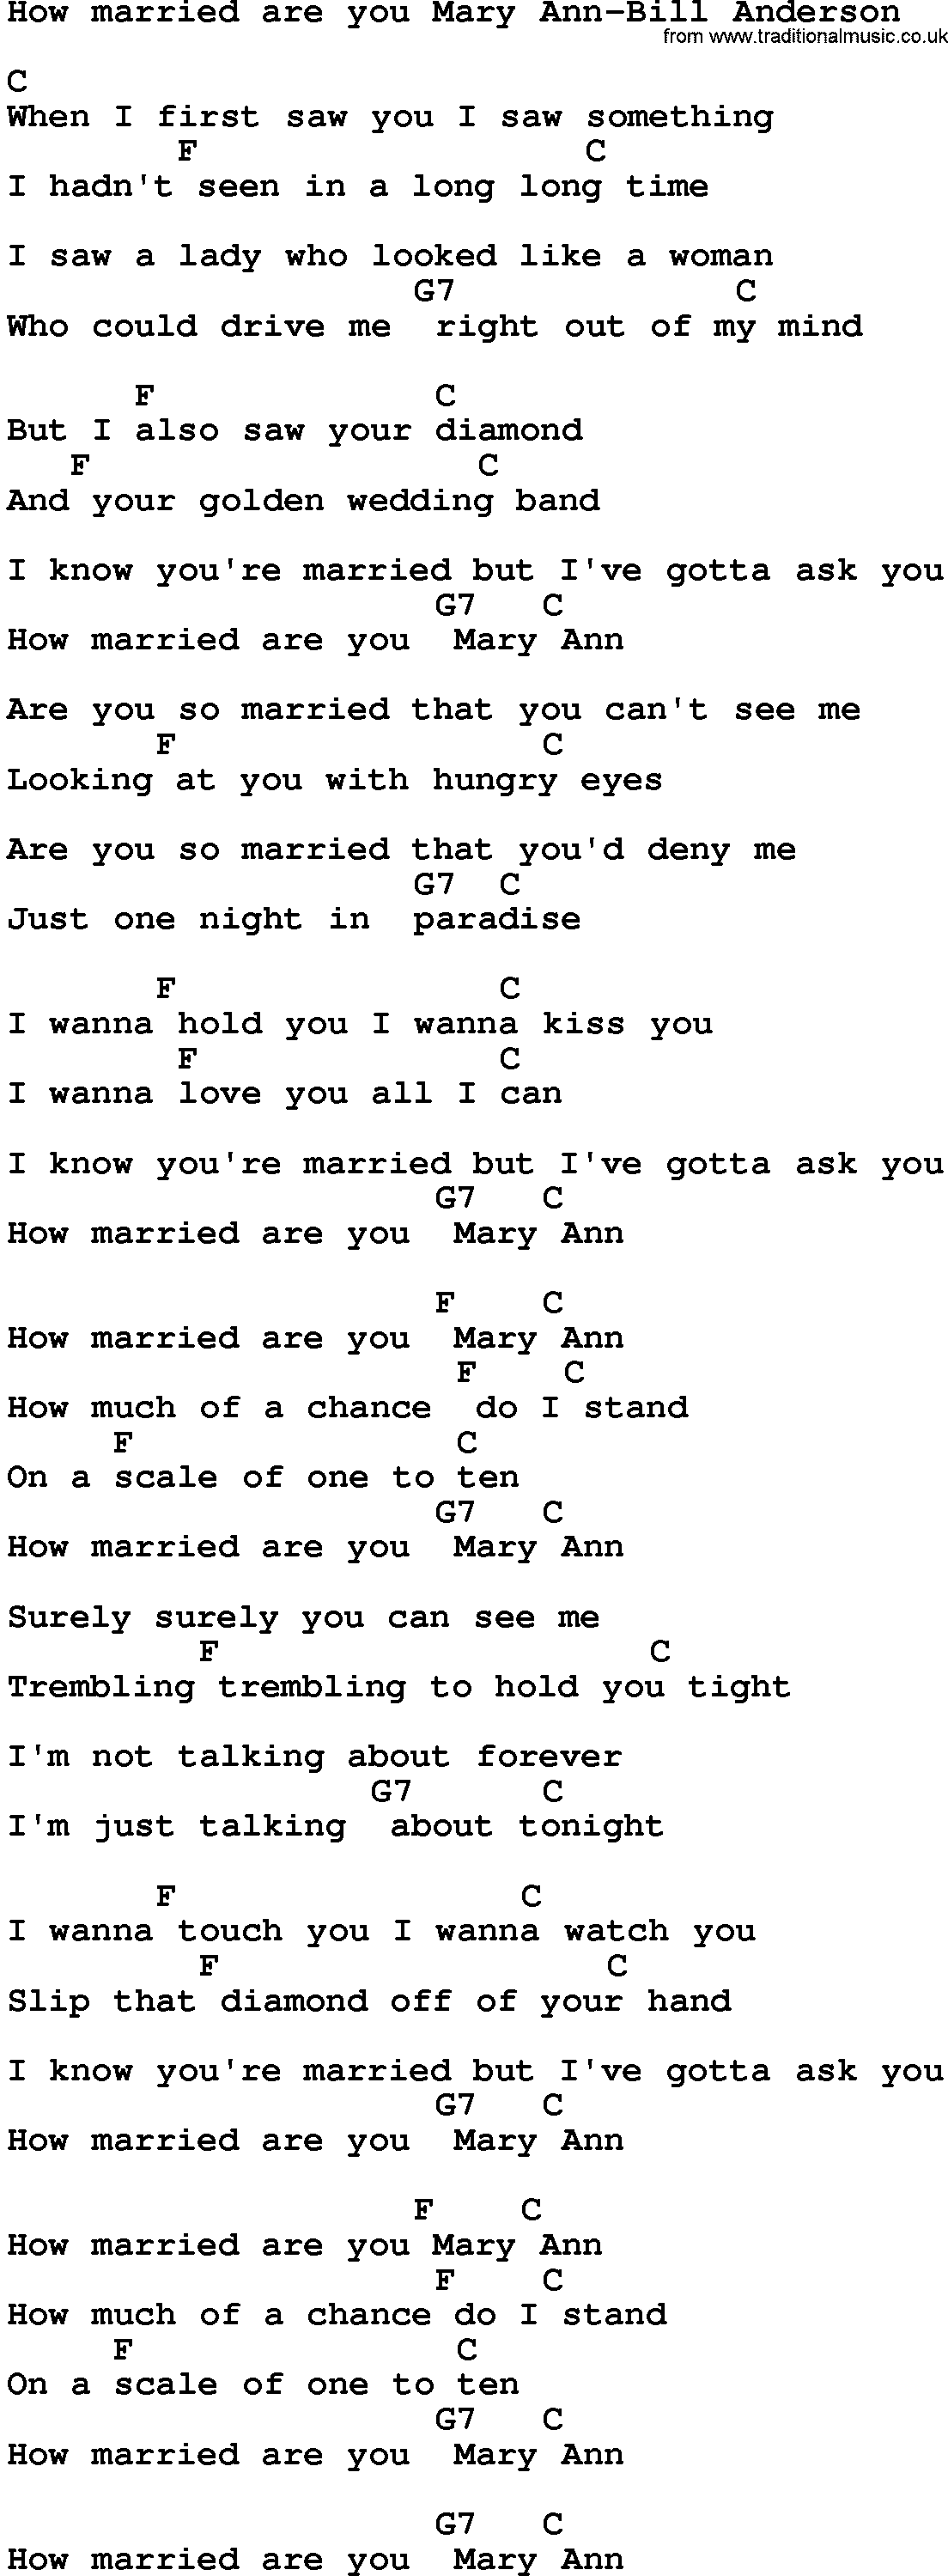 Country music song: How Married Are You Mary Ann-Bill Anderson lyrics and chords